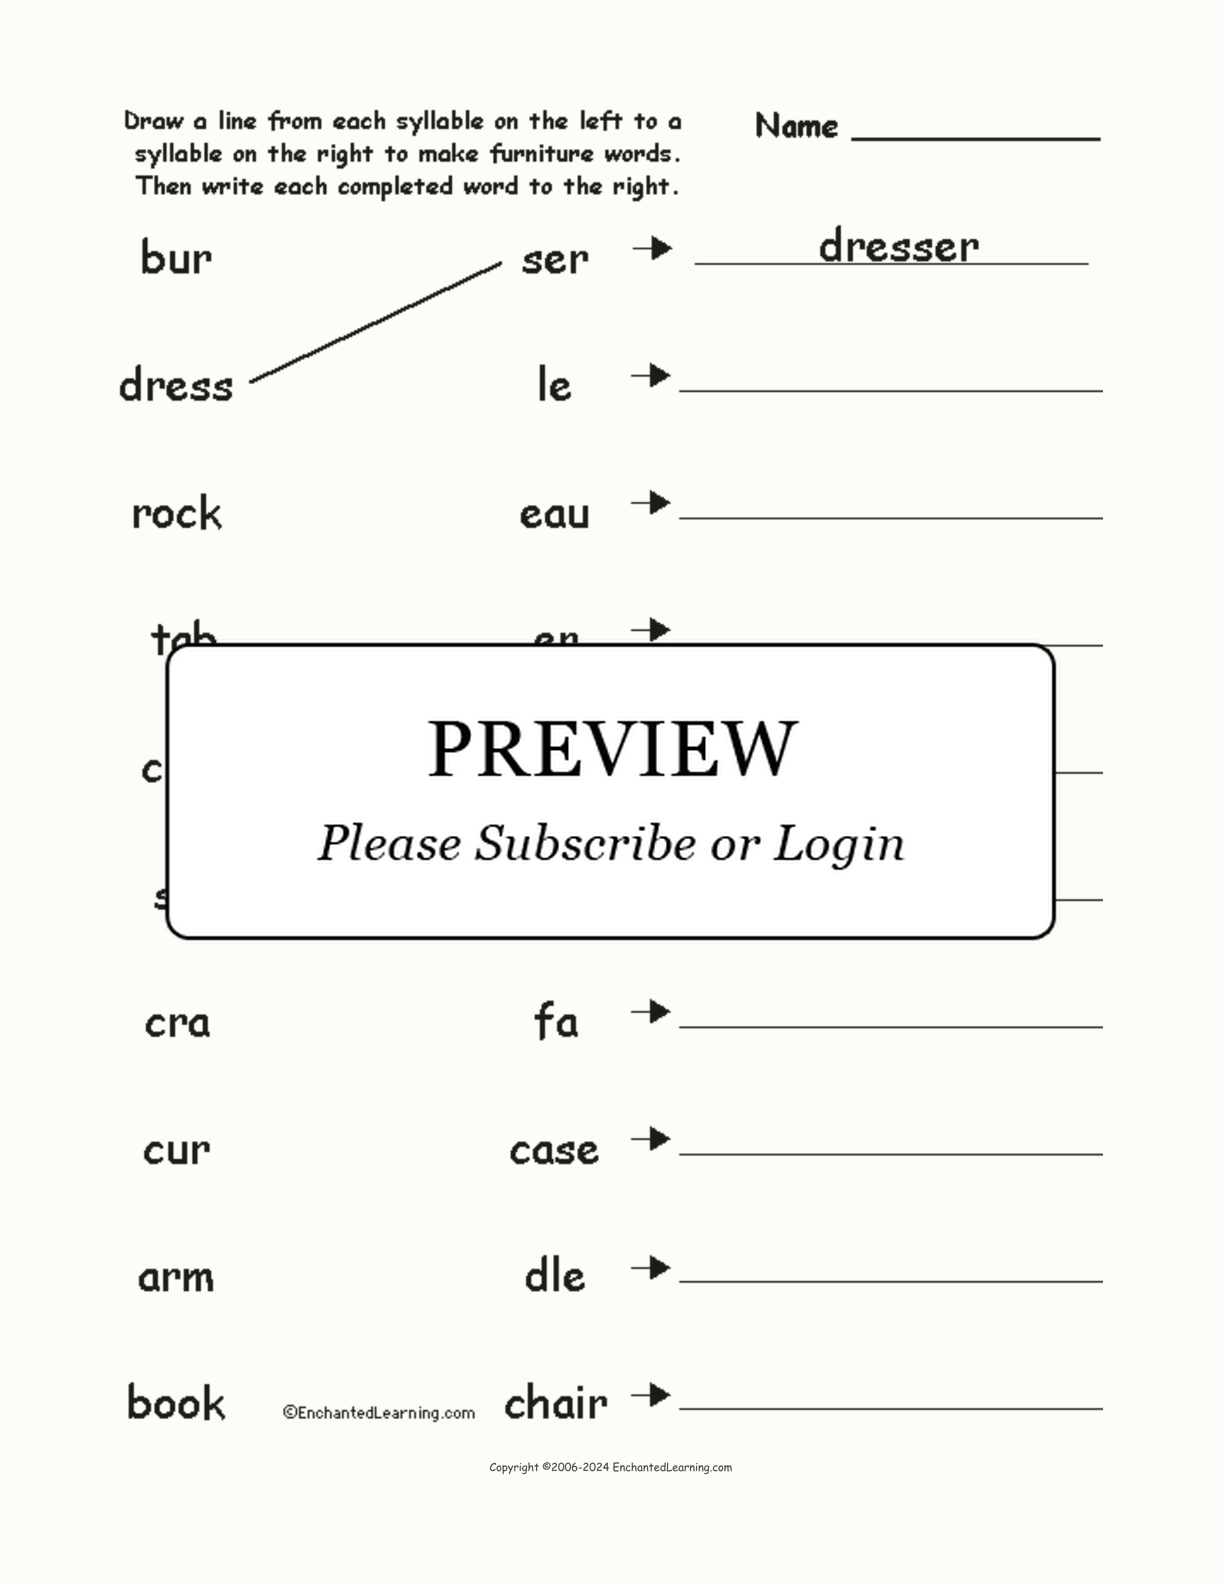 Match the Syllables: Furniture Words interactive worksheet page 1